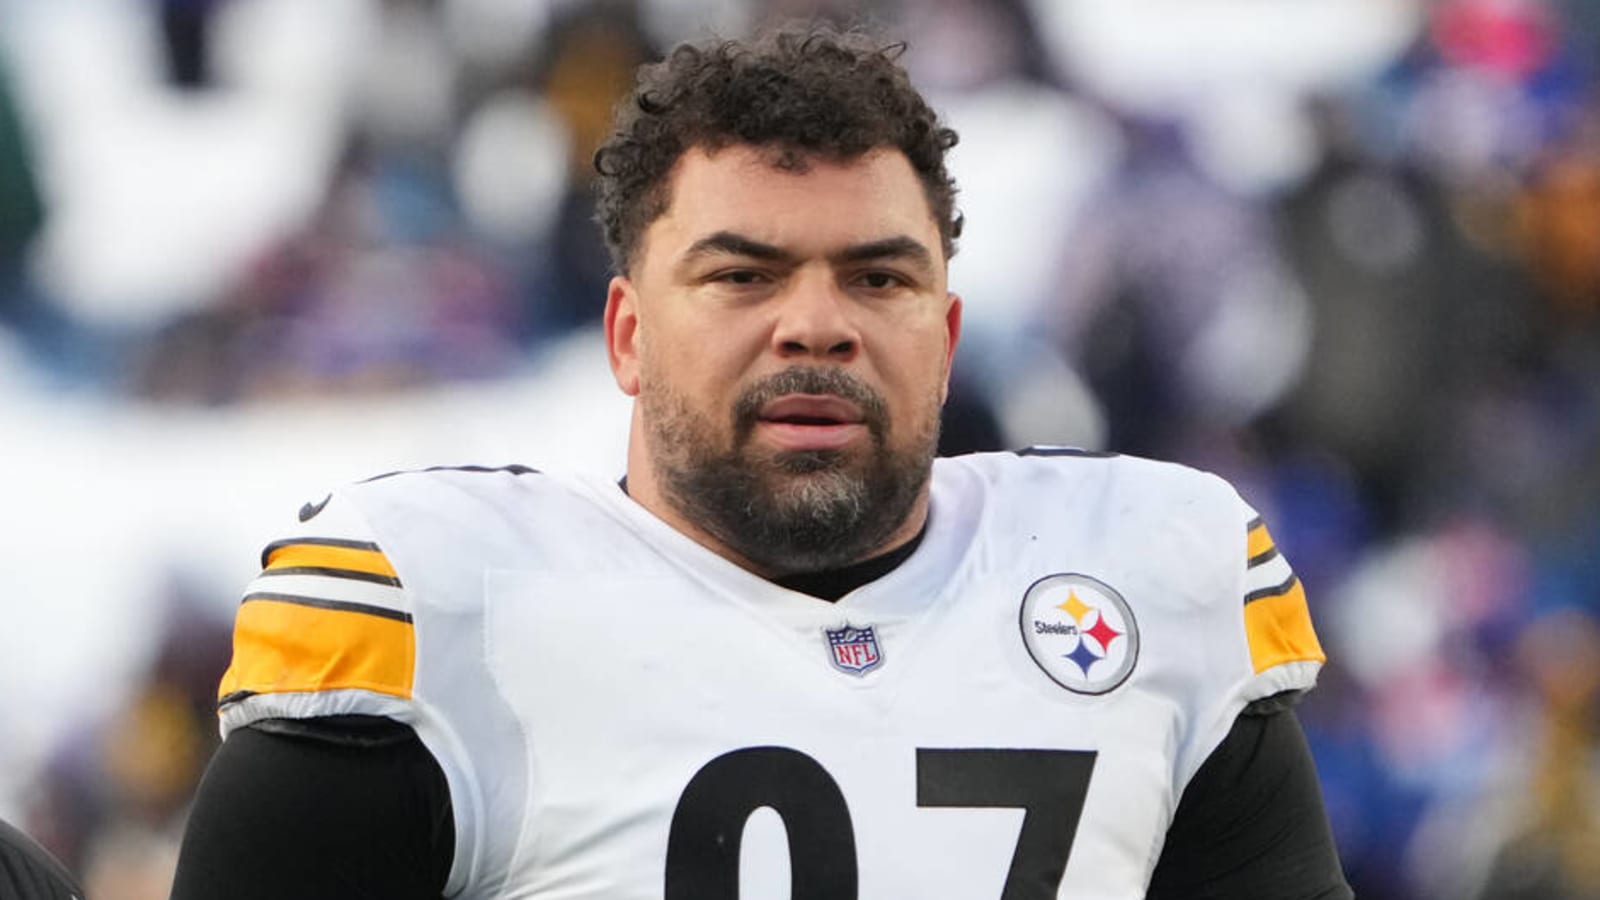 Longtime Steelers DT hints extension is coming